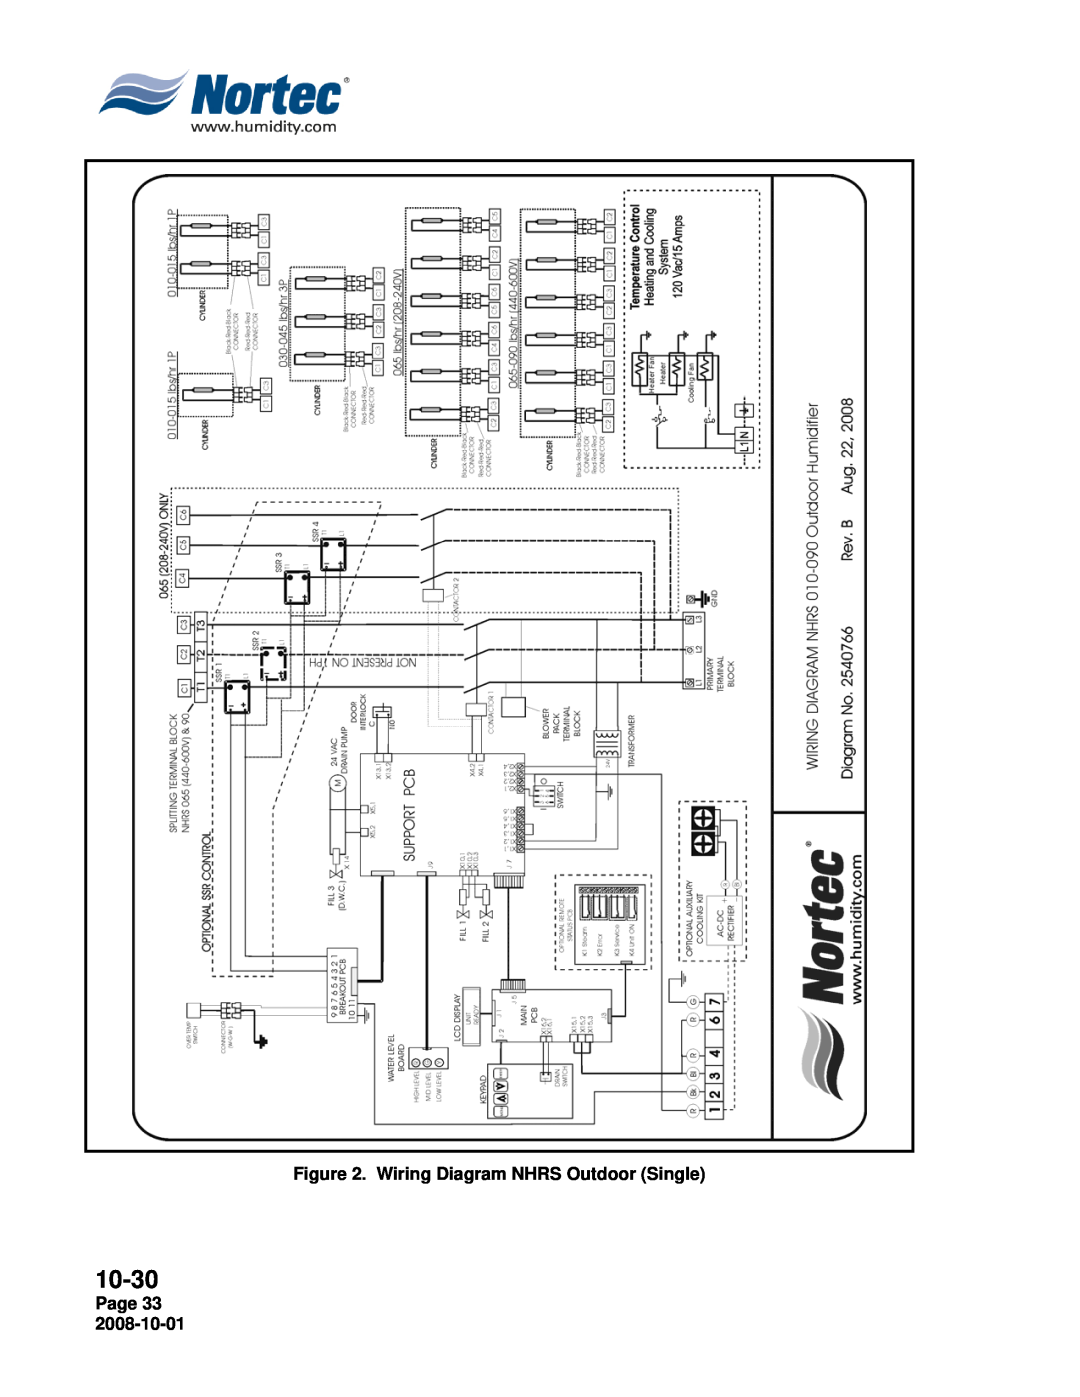 Nortec Industries NH Series installation manual 10-30, Wiring Diagram NHRS Outdoor Single, Page 